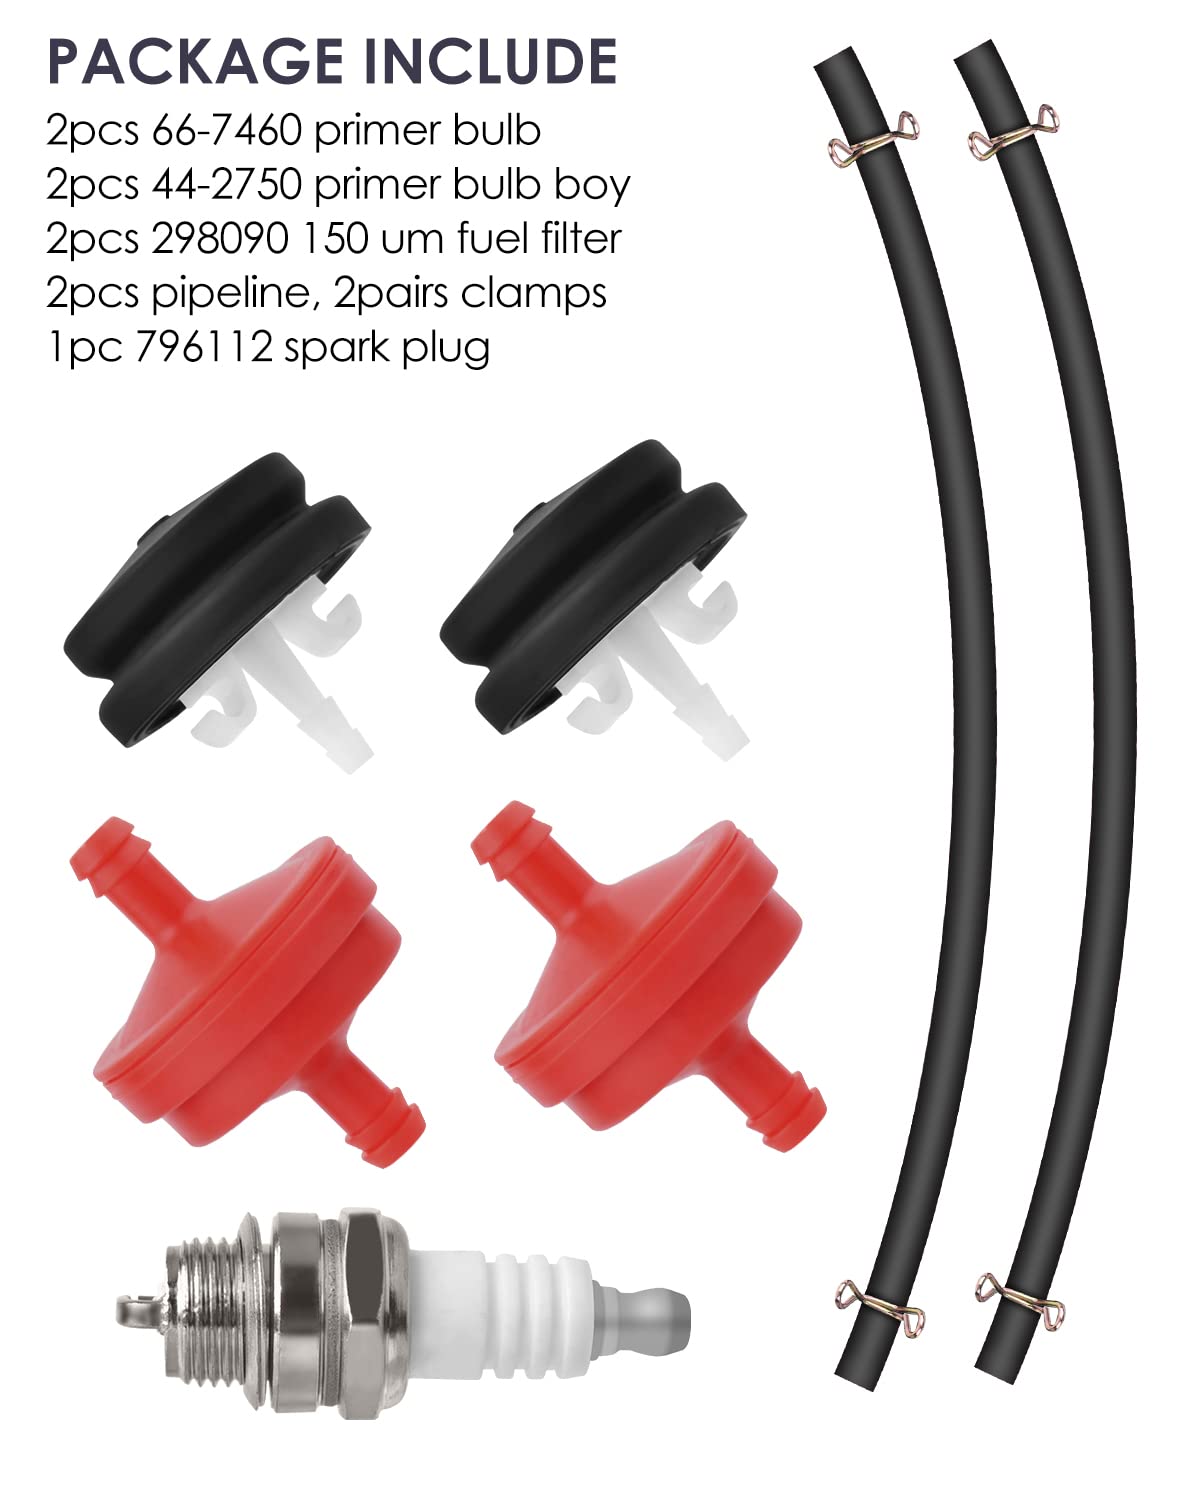 66-7460 Primer Bulb 2Pcs with 44-2750 primer body and 298090 150 um fuel filter, 120-440 Snow Blower Primer Bulbs with hose Compatible for Toro Lawn-Mower and Snow-Blower HSK635 Carburetor 66-7460